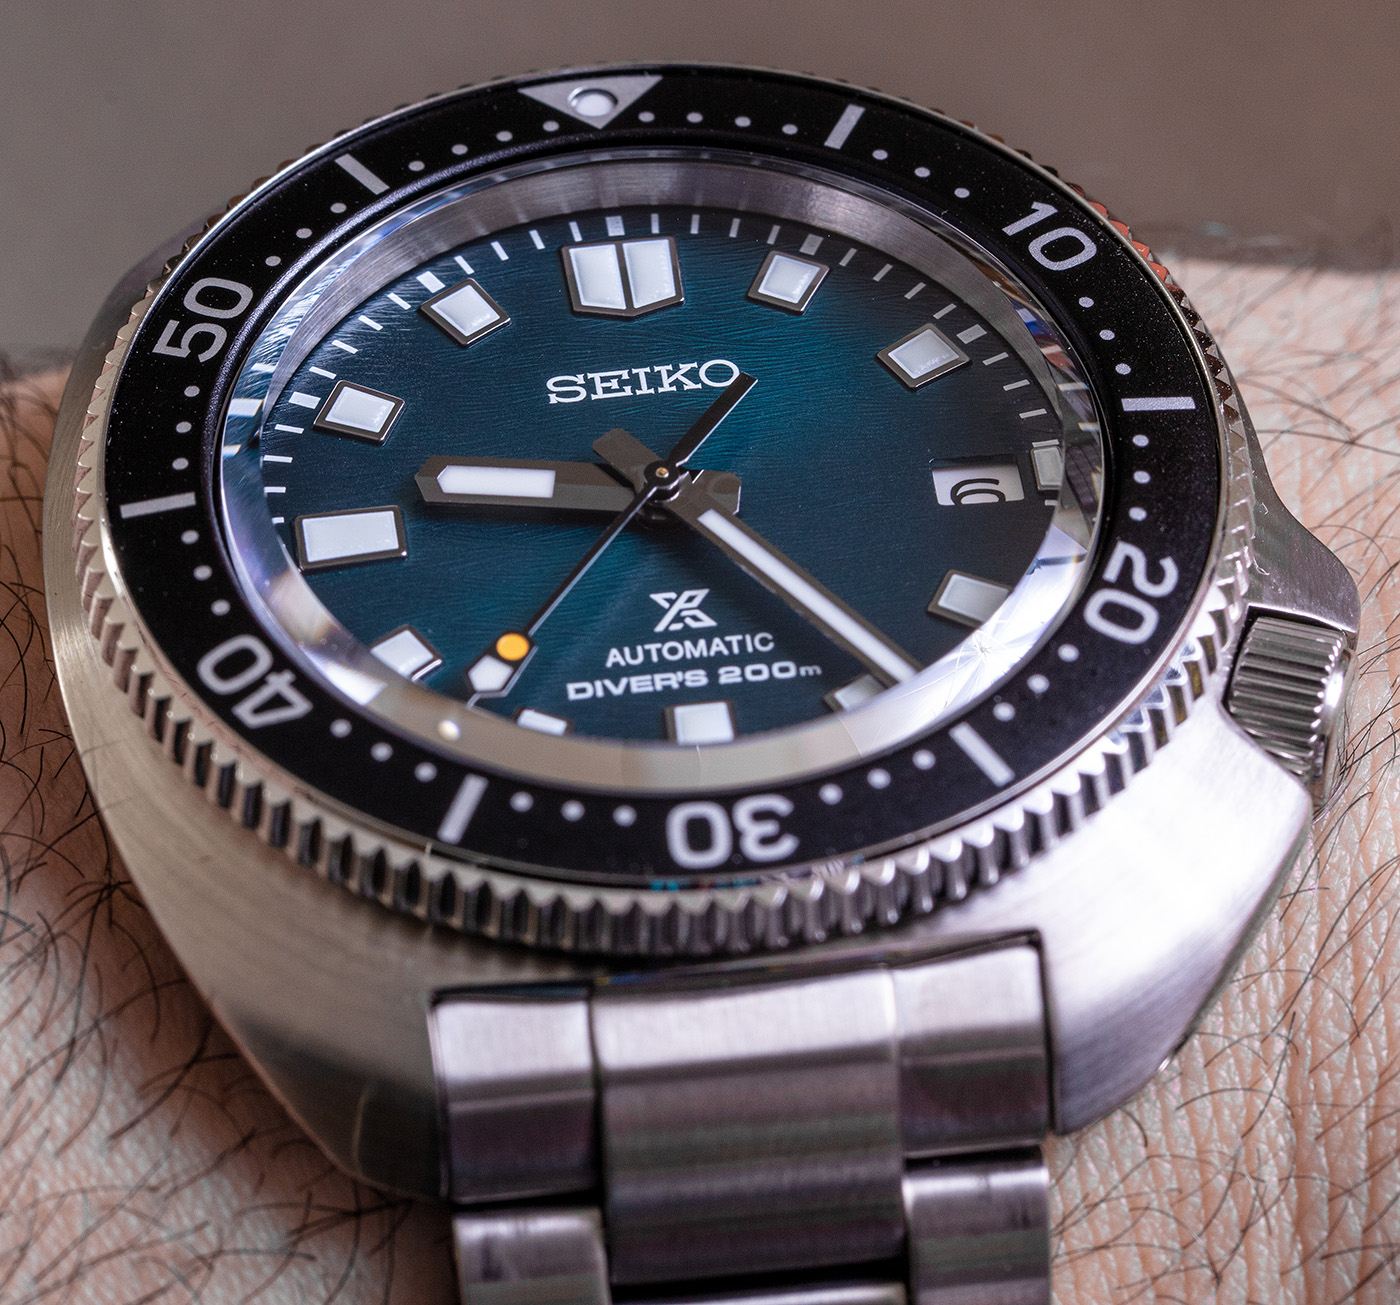 Watch Review: Seiko Prospex Built For The Ice Divers . Special Edition  SPB261, SPB263, And SPB265 | aBlogtoWatch